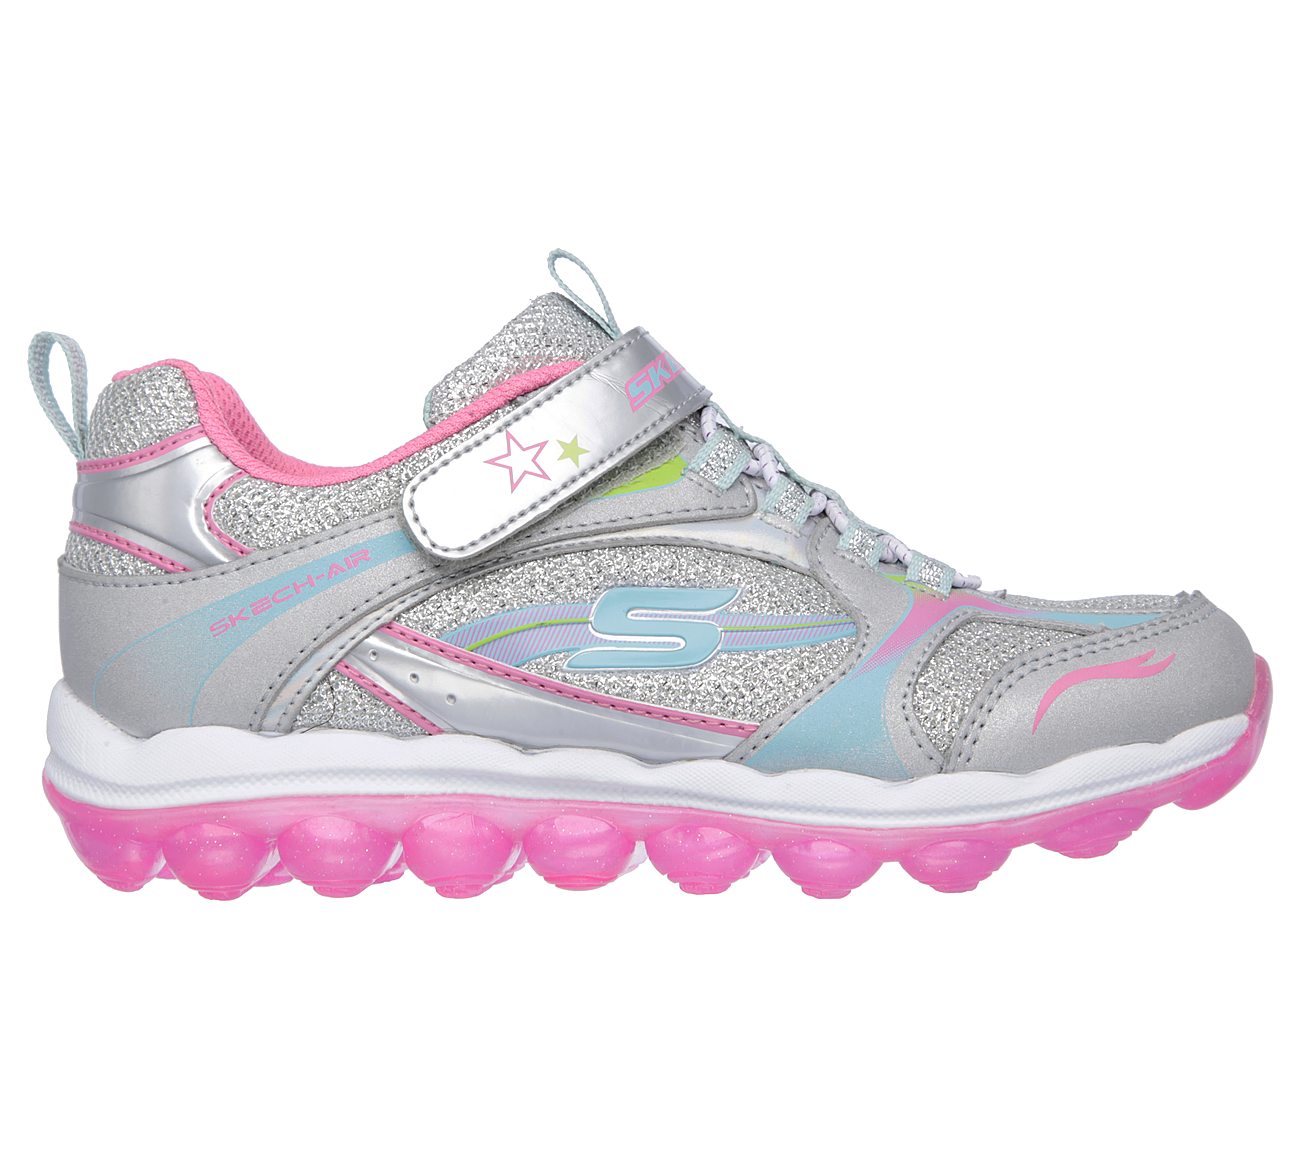 skechers with air bubble